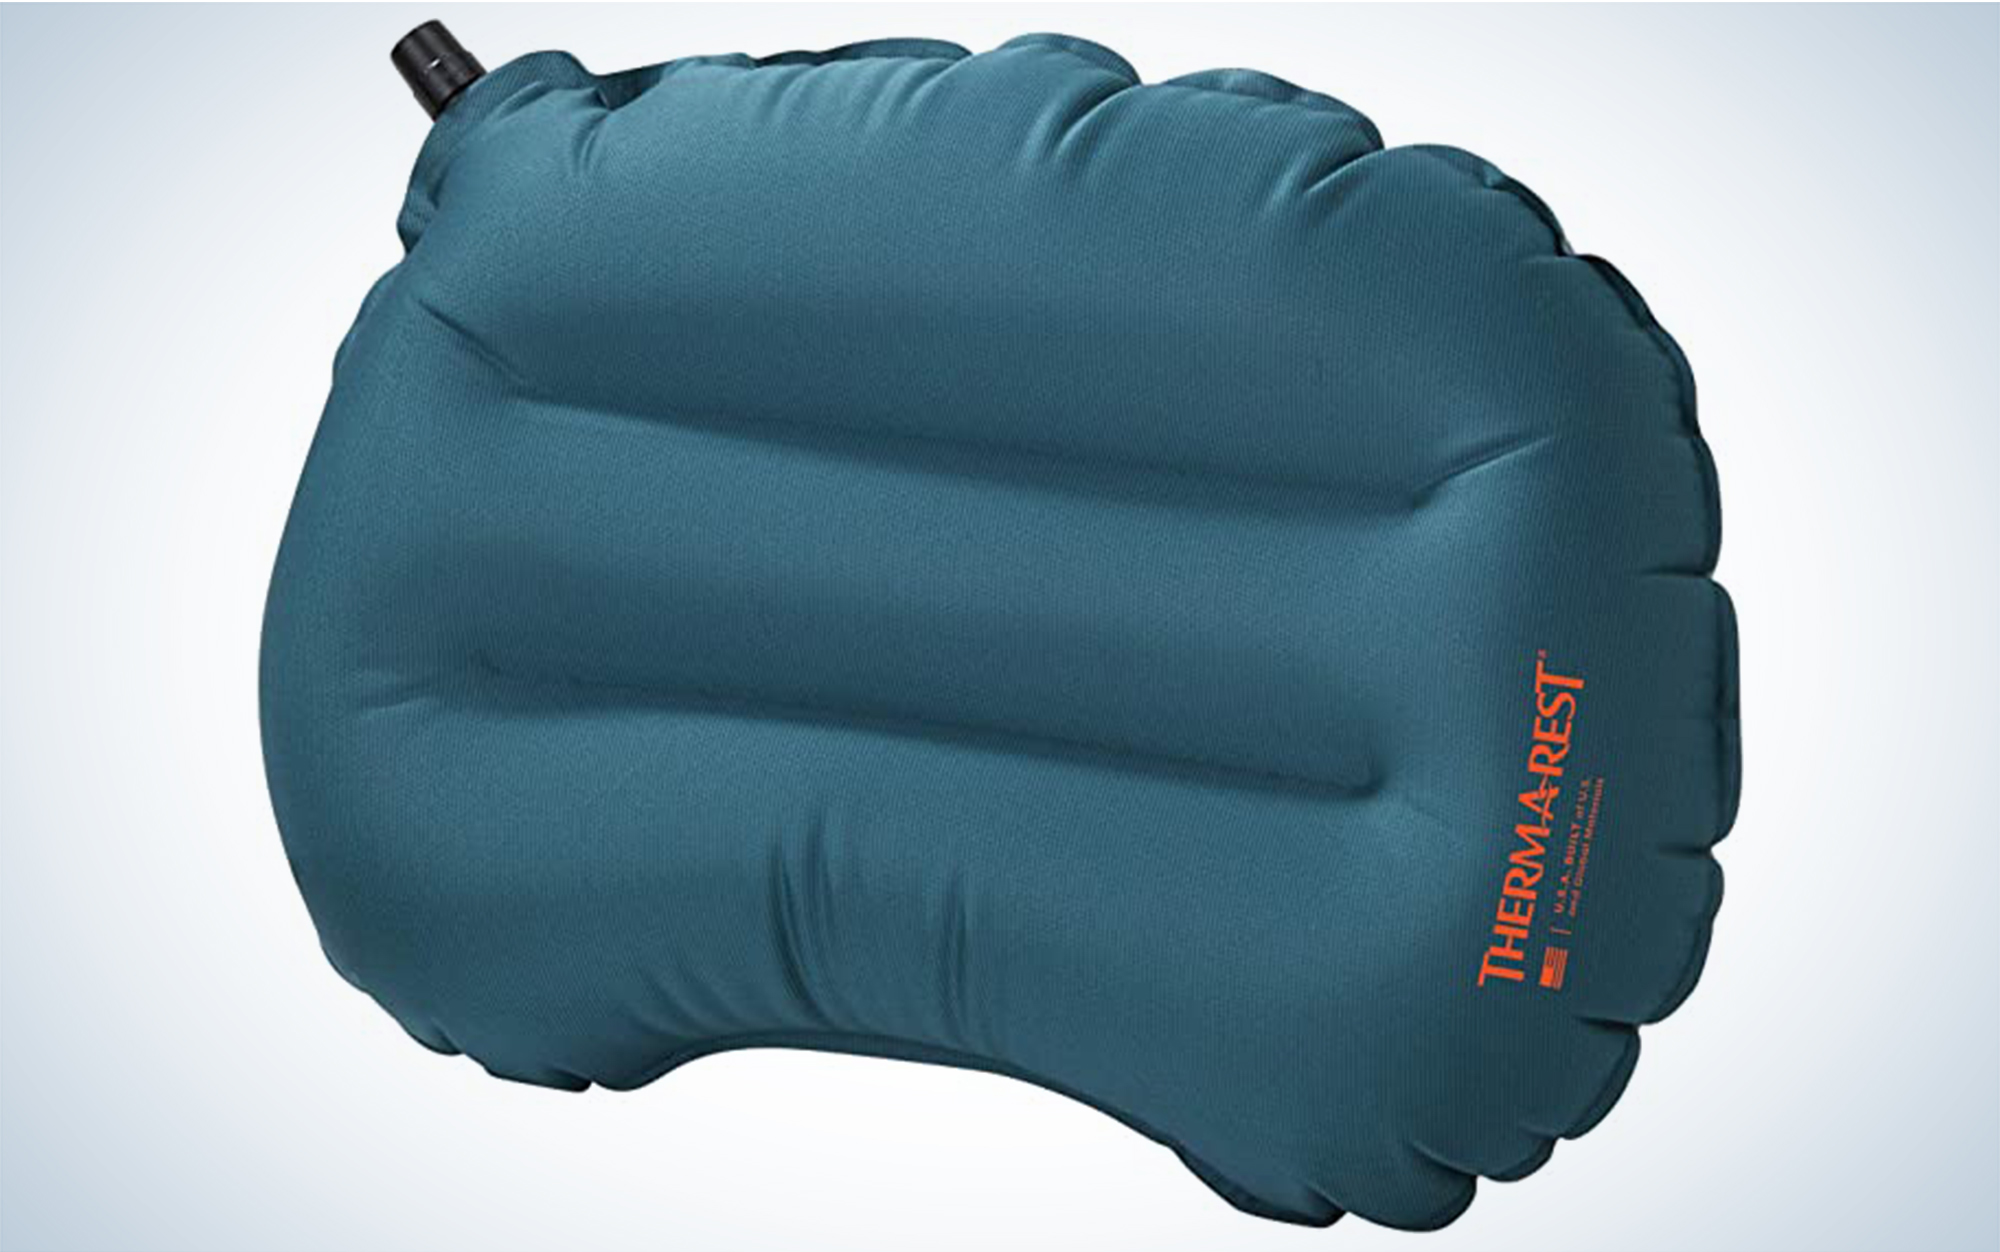 The Therm-a-Rest Air Head Lite Pillow